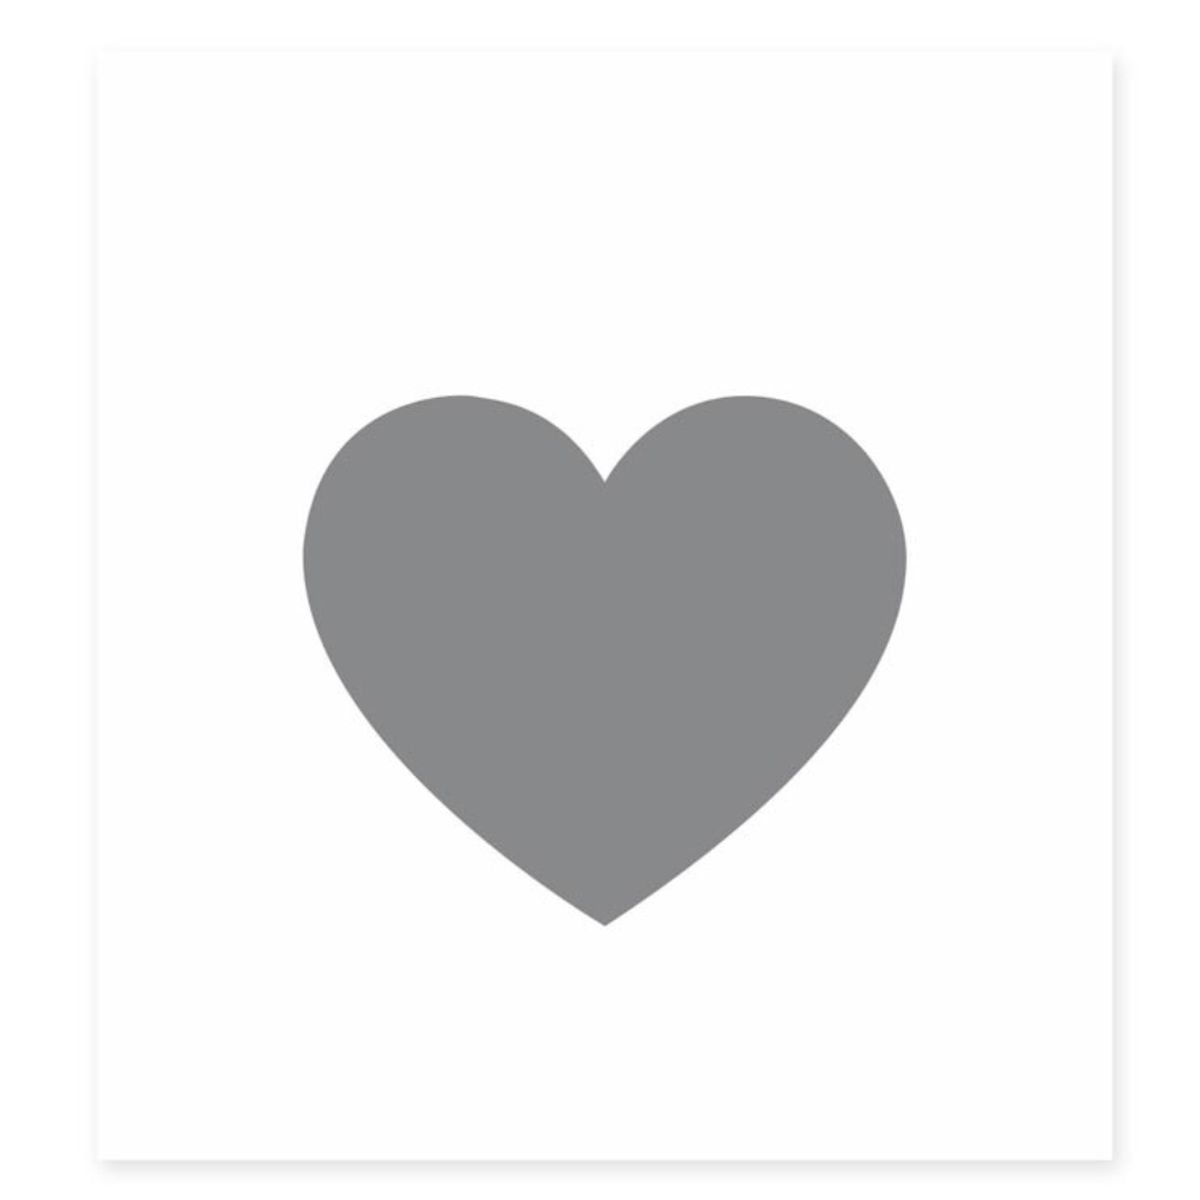 Heart sticker for personalized wall decoration - Gray